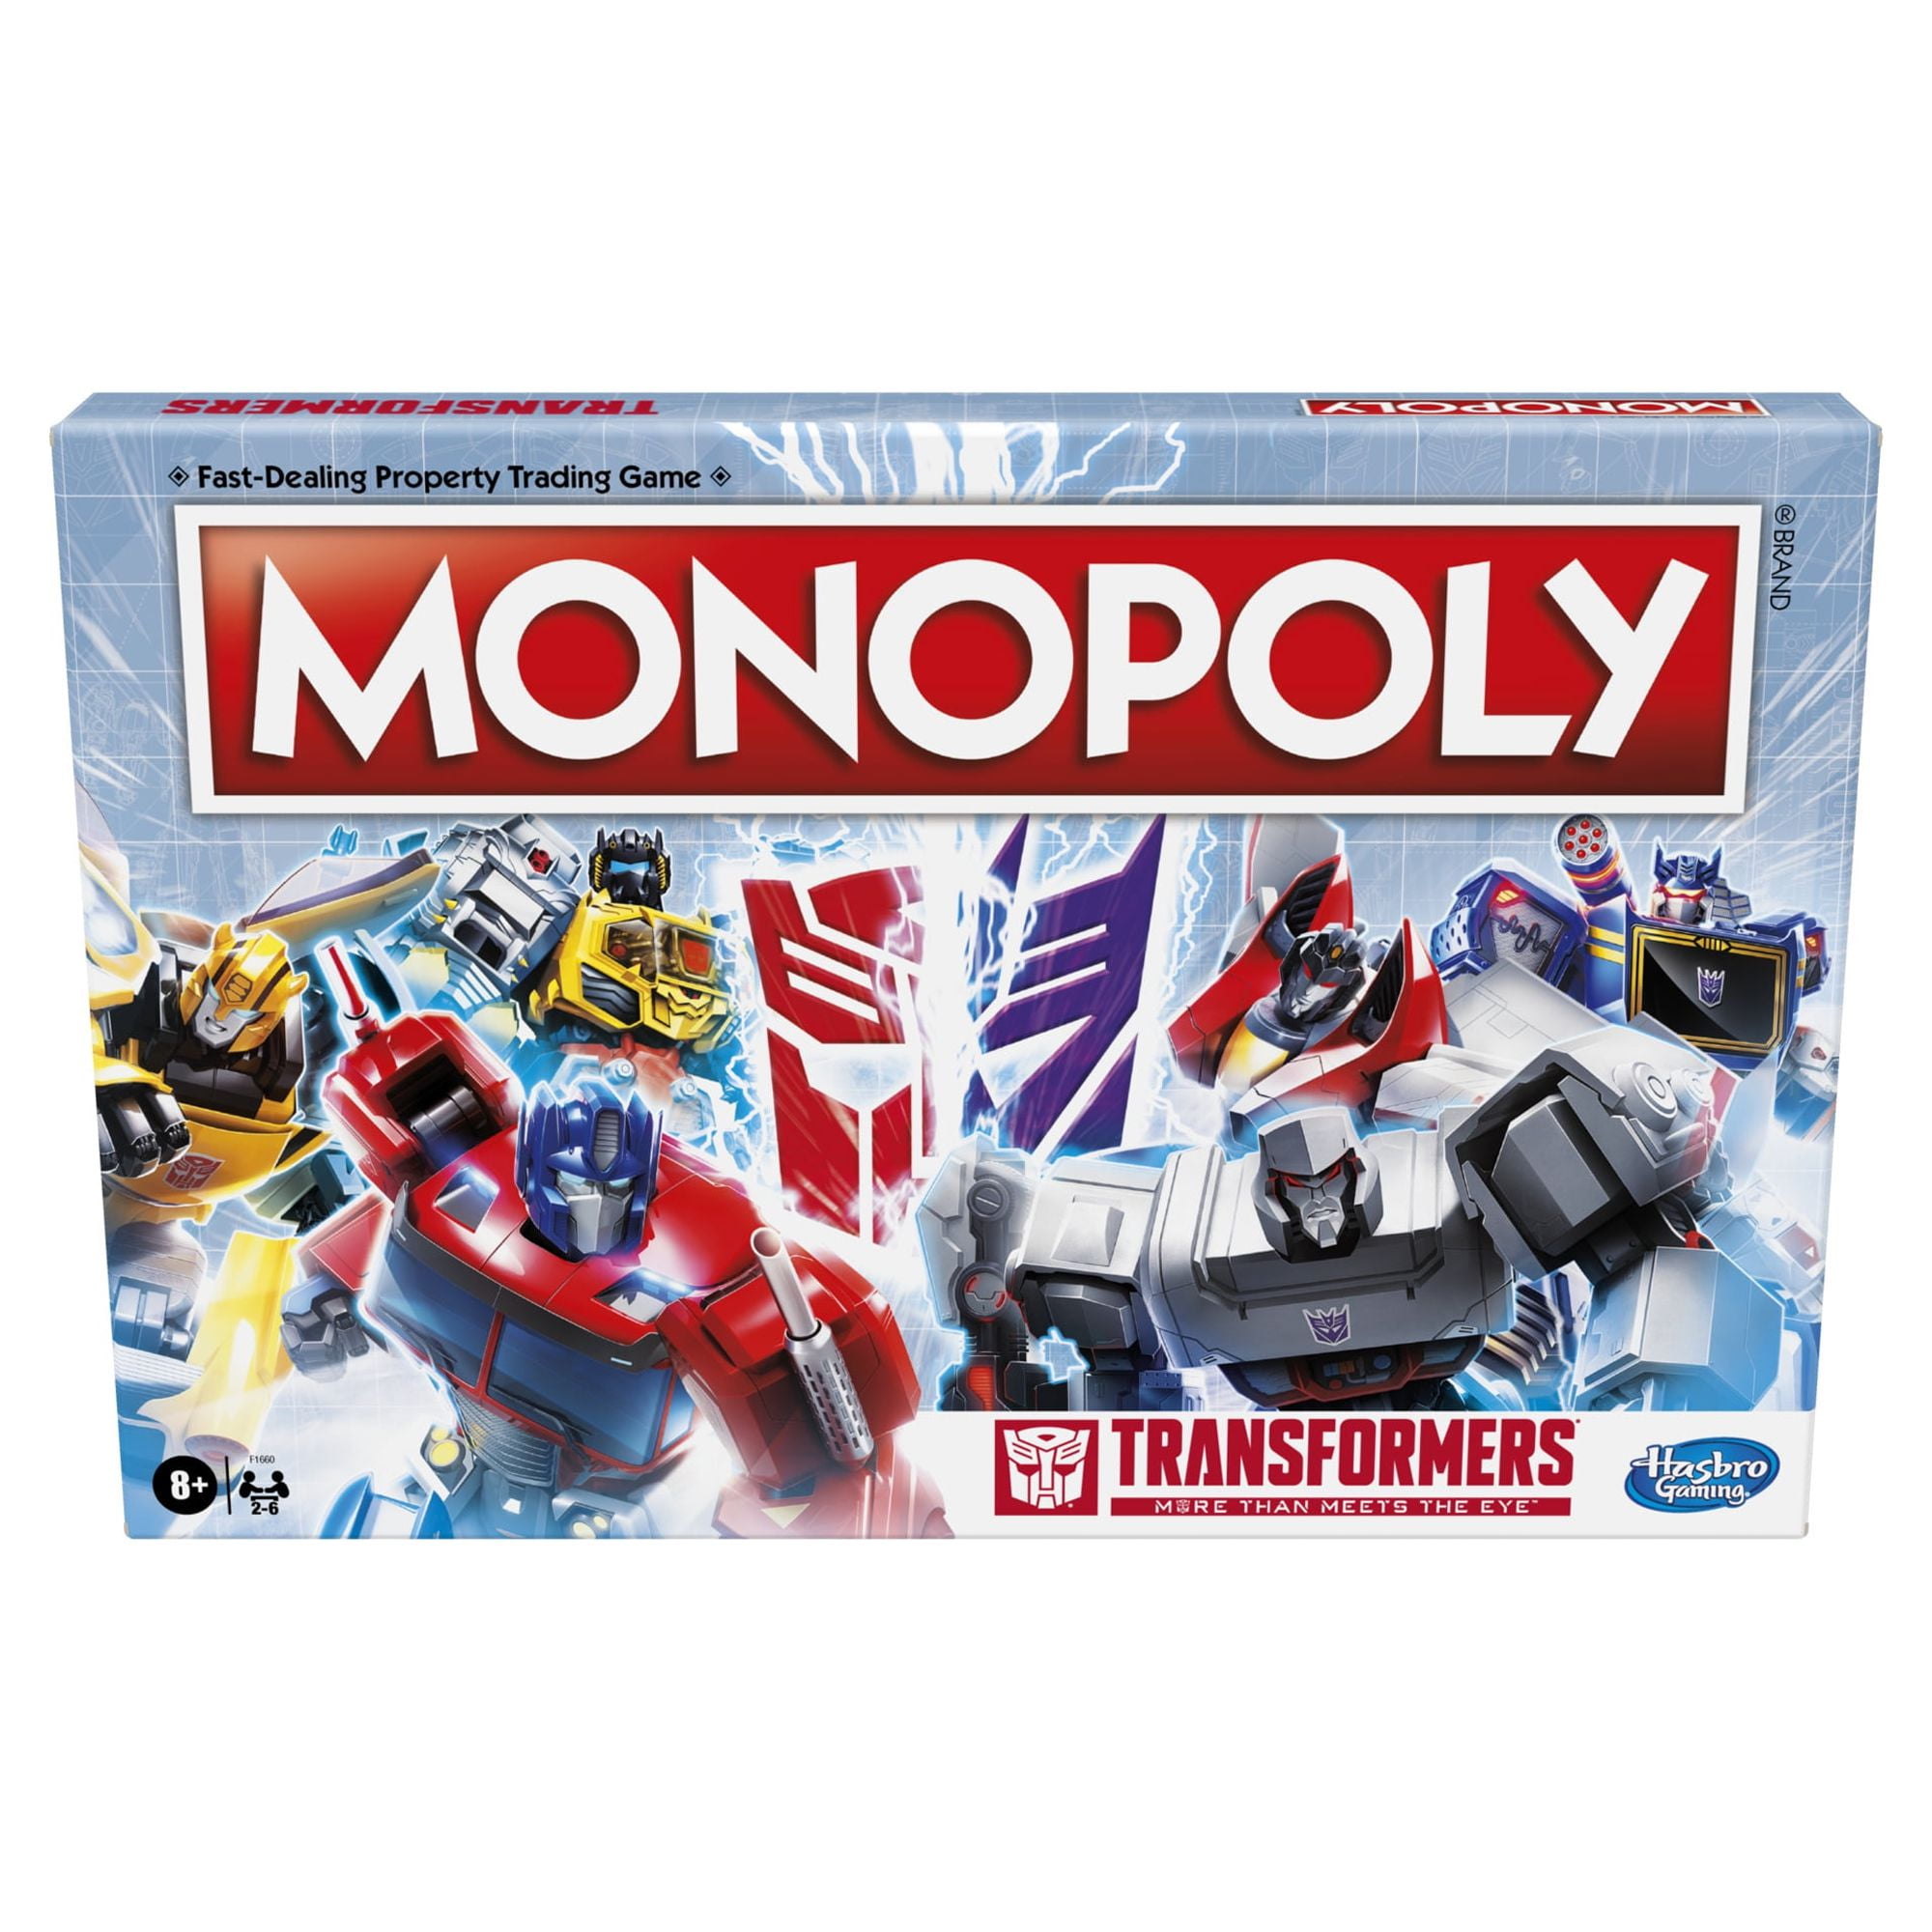 Monopoly: Transformers Edition Board Game for Kids Ages 8 and Up, 2-6 Players